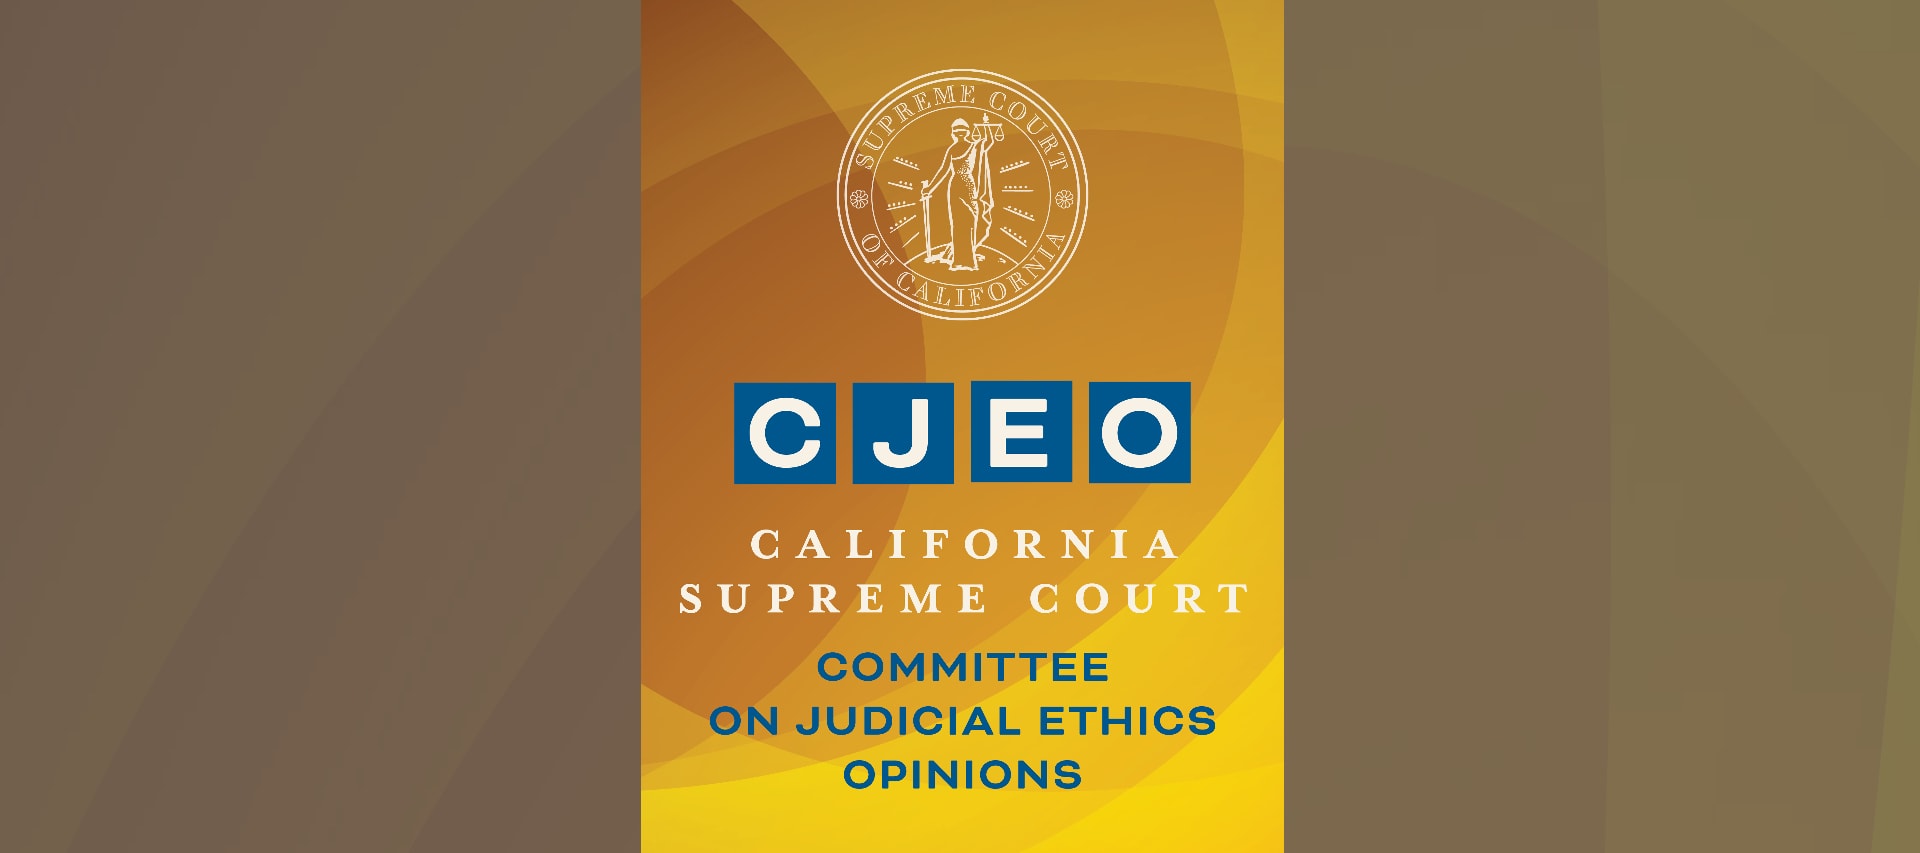 CJEO rules on judges searching CMS